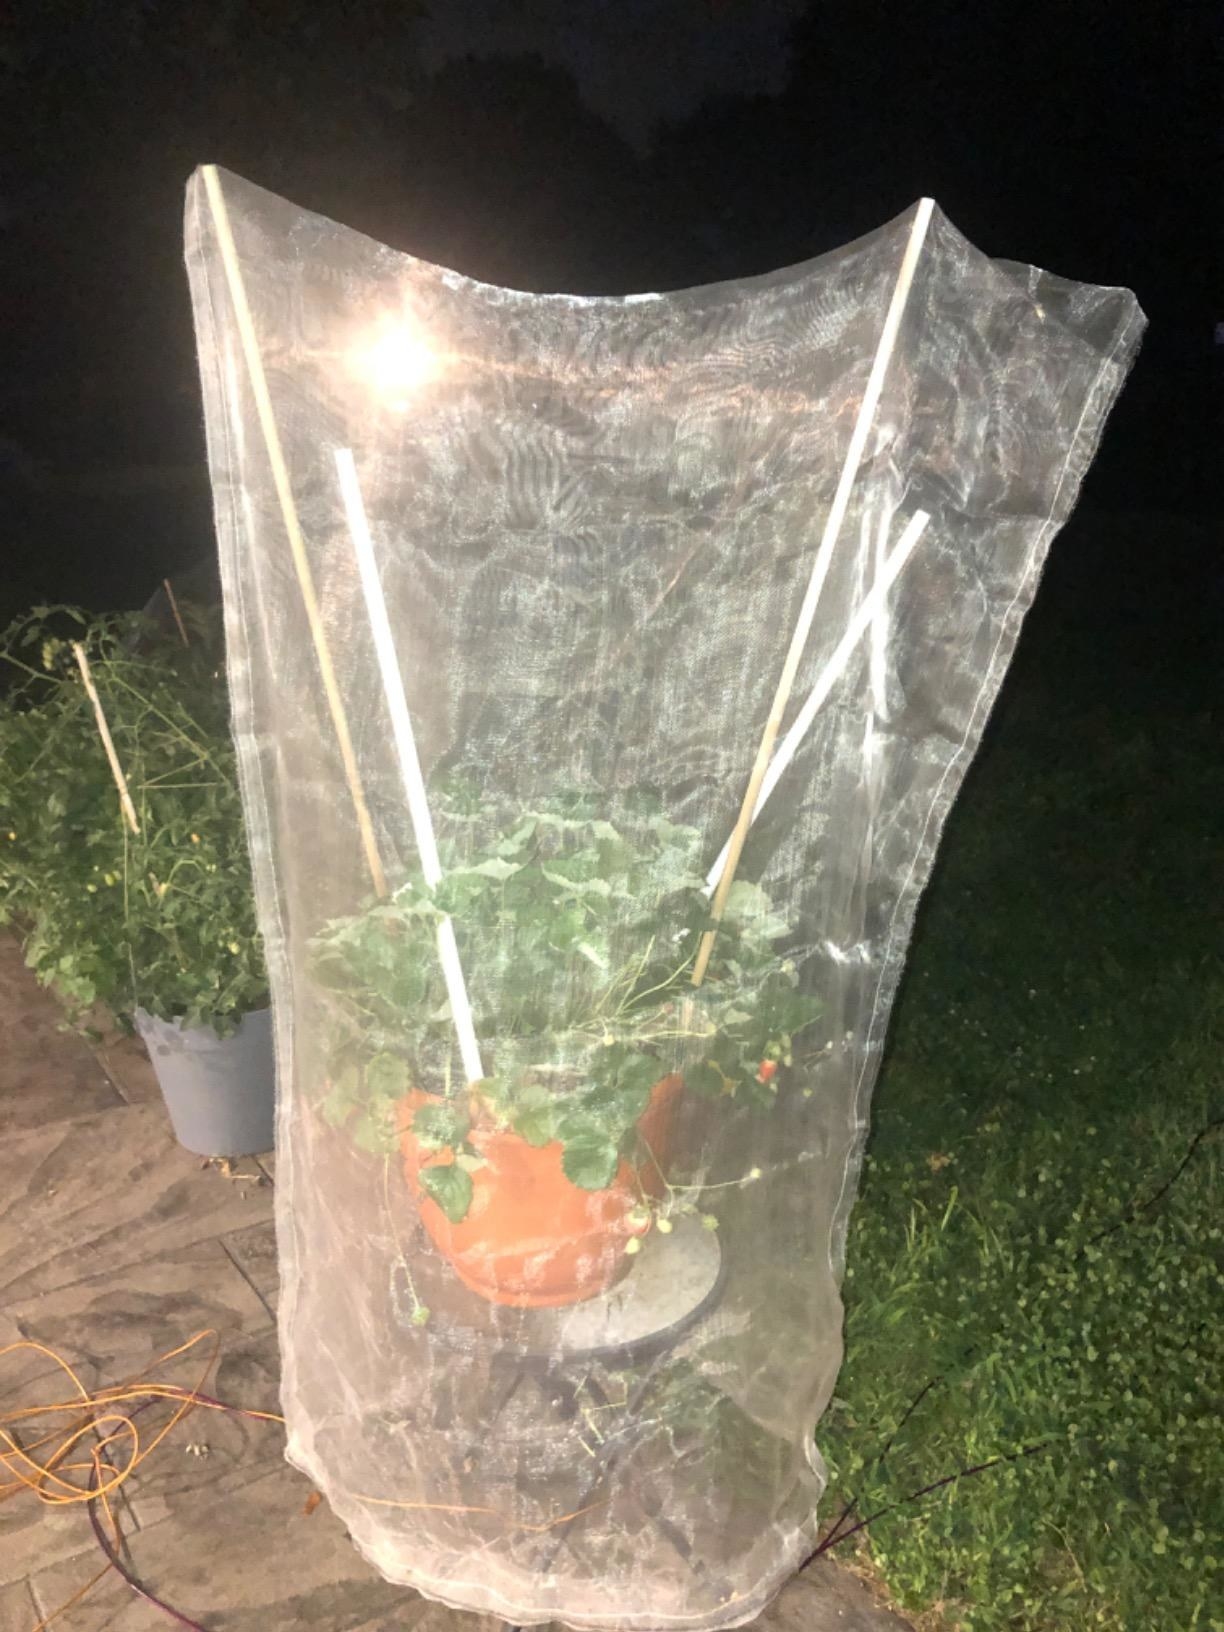 Reviewer photo of the mesh bag over their potted strawberry plant